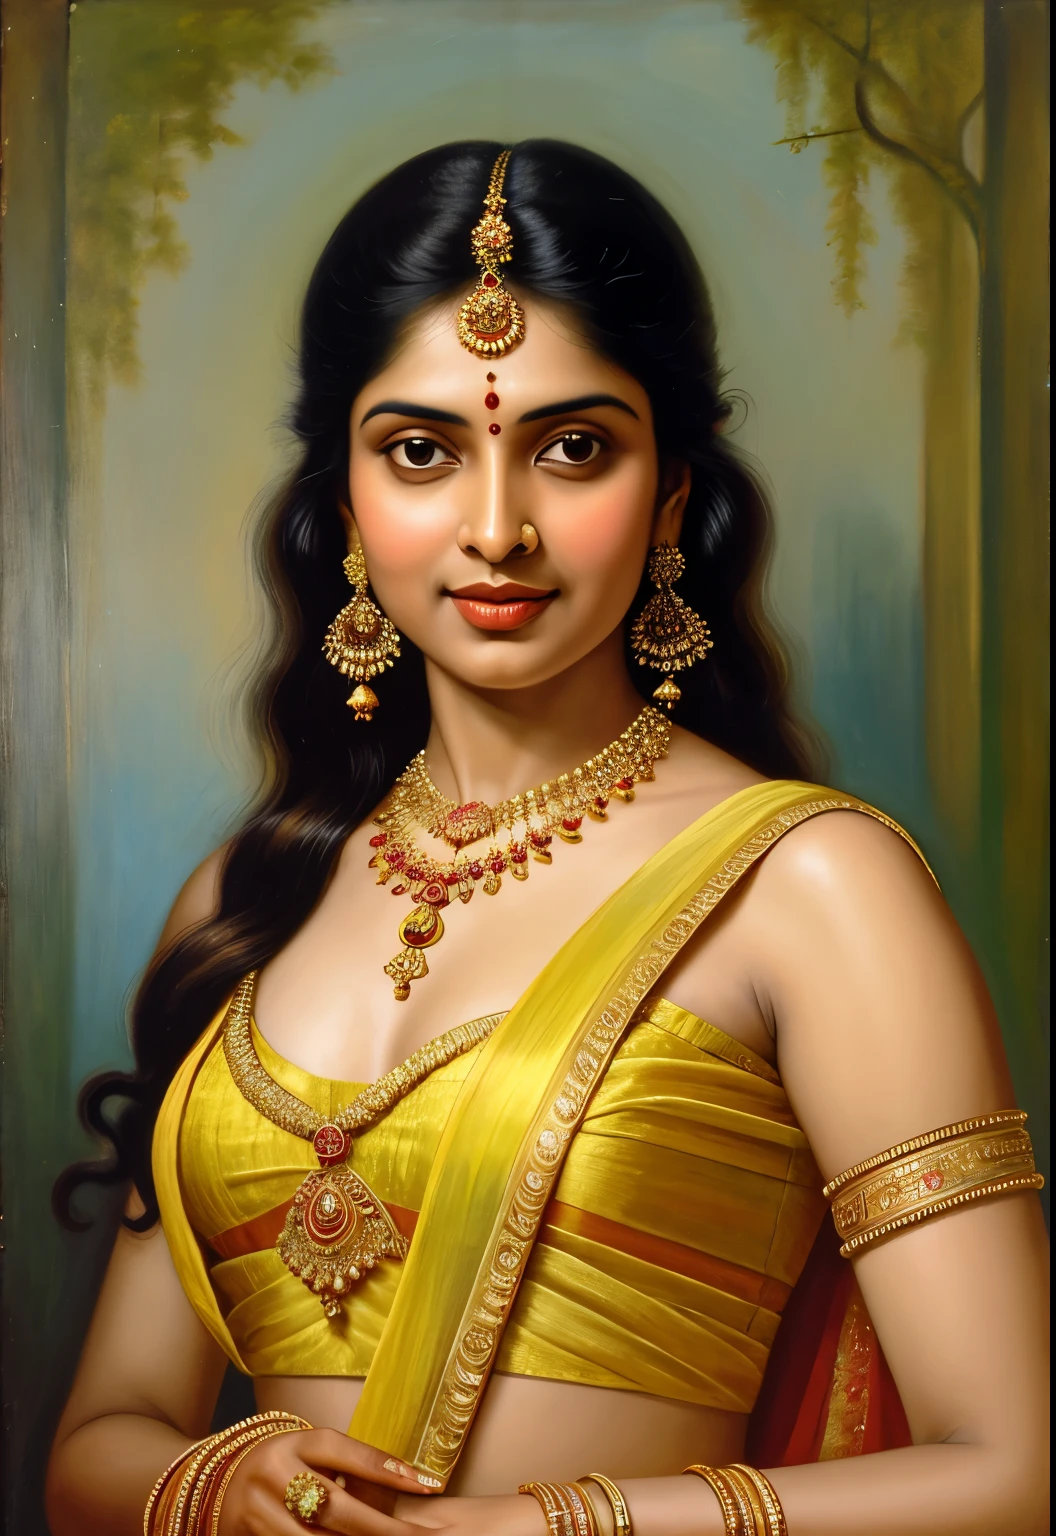 painting of a woman in a sari with a necklace and earrings, inspired by Raja Ravi Varma, szukalski ravi varma, portrait of a beautiful goddess, by Raja Ravi Varma, indian goddess, traditional beauty, a stunning portrait of a goddess, inspired by T. K. Padmini, indian art, indian goddess of wealth, portrait of a goddess